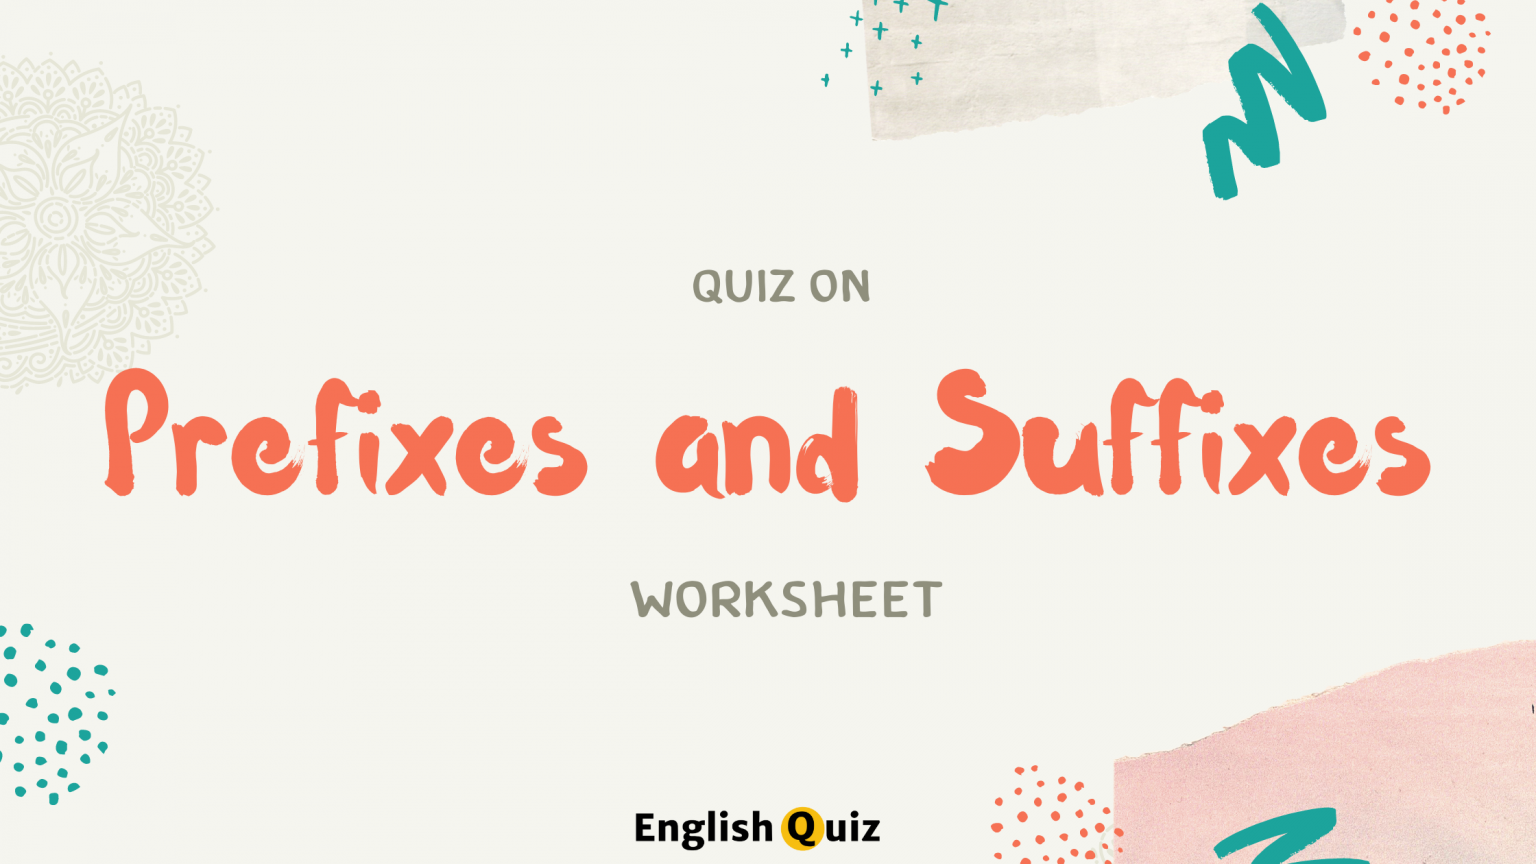 prefixes-and-suffixes-worksheet-exercises-answers-english-quiz